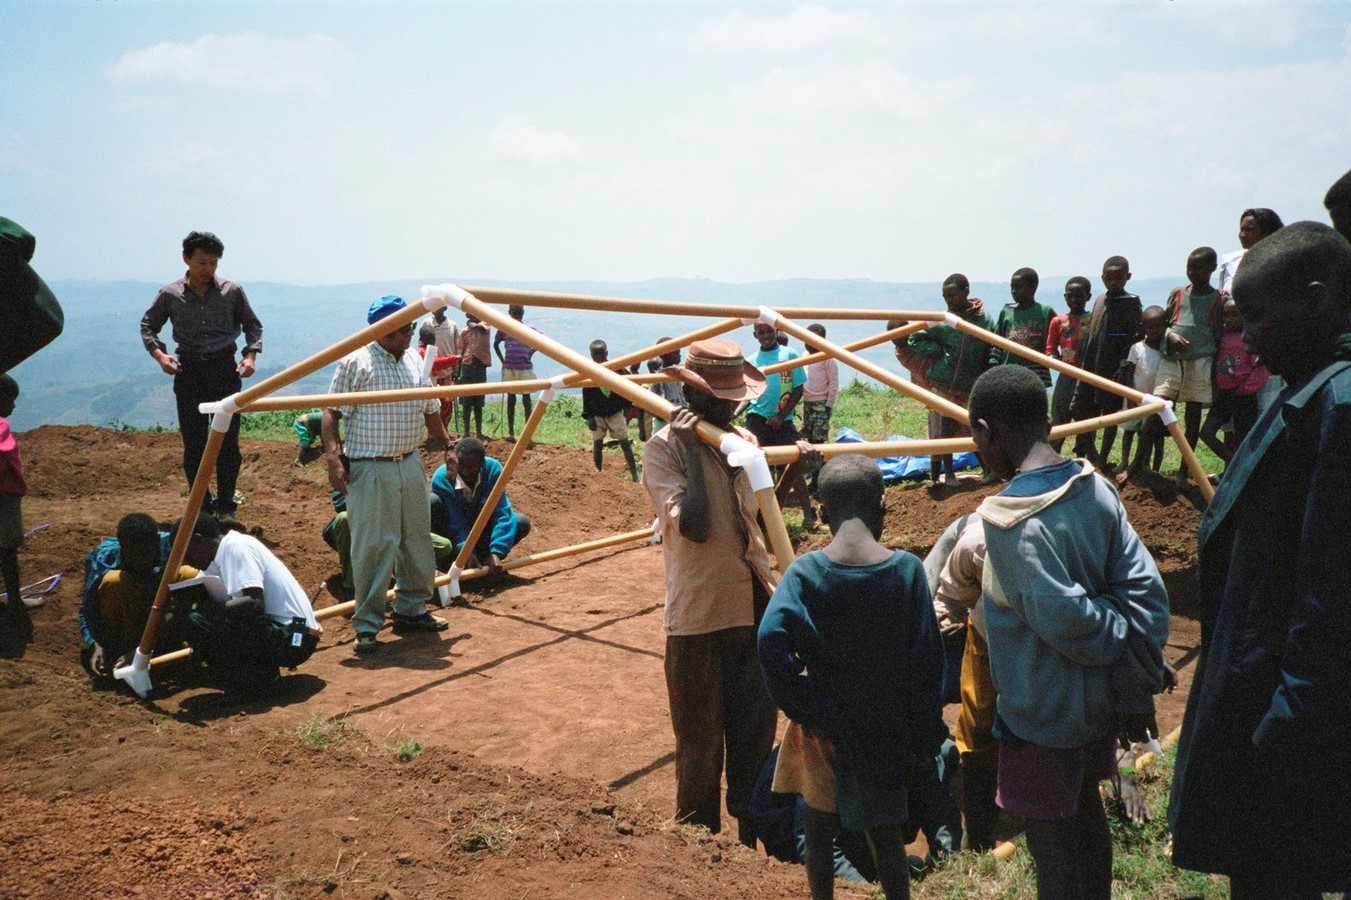 10 Reasons to architects should practice for humanitarian architecture - Sheet14